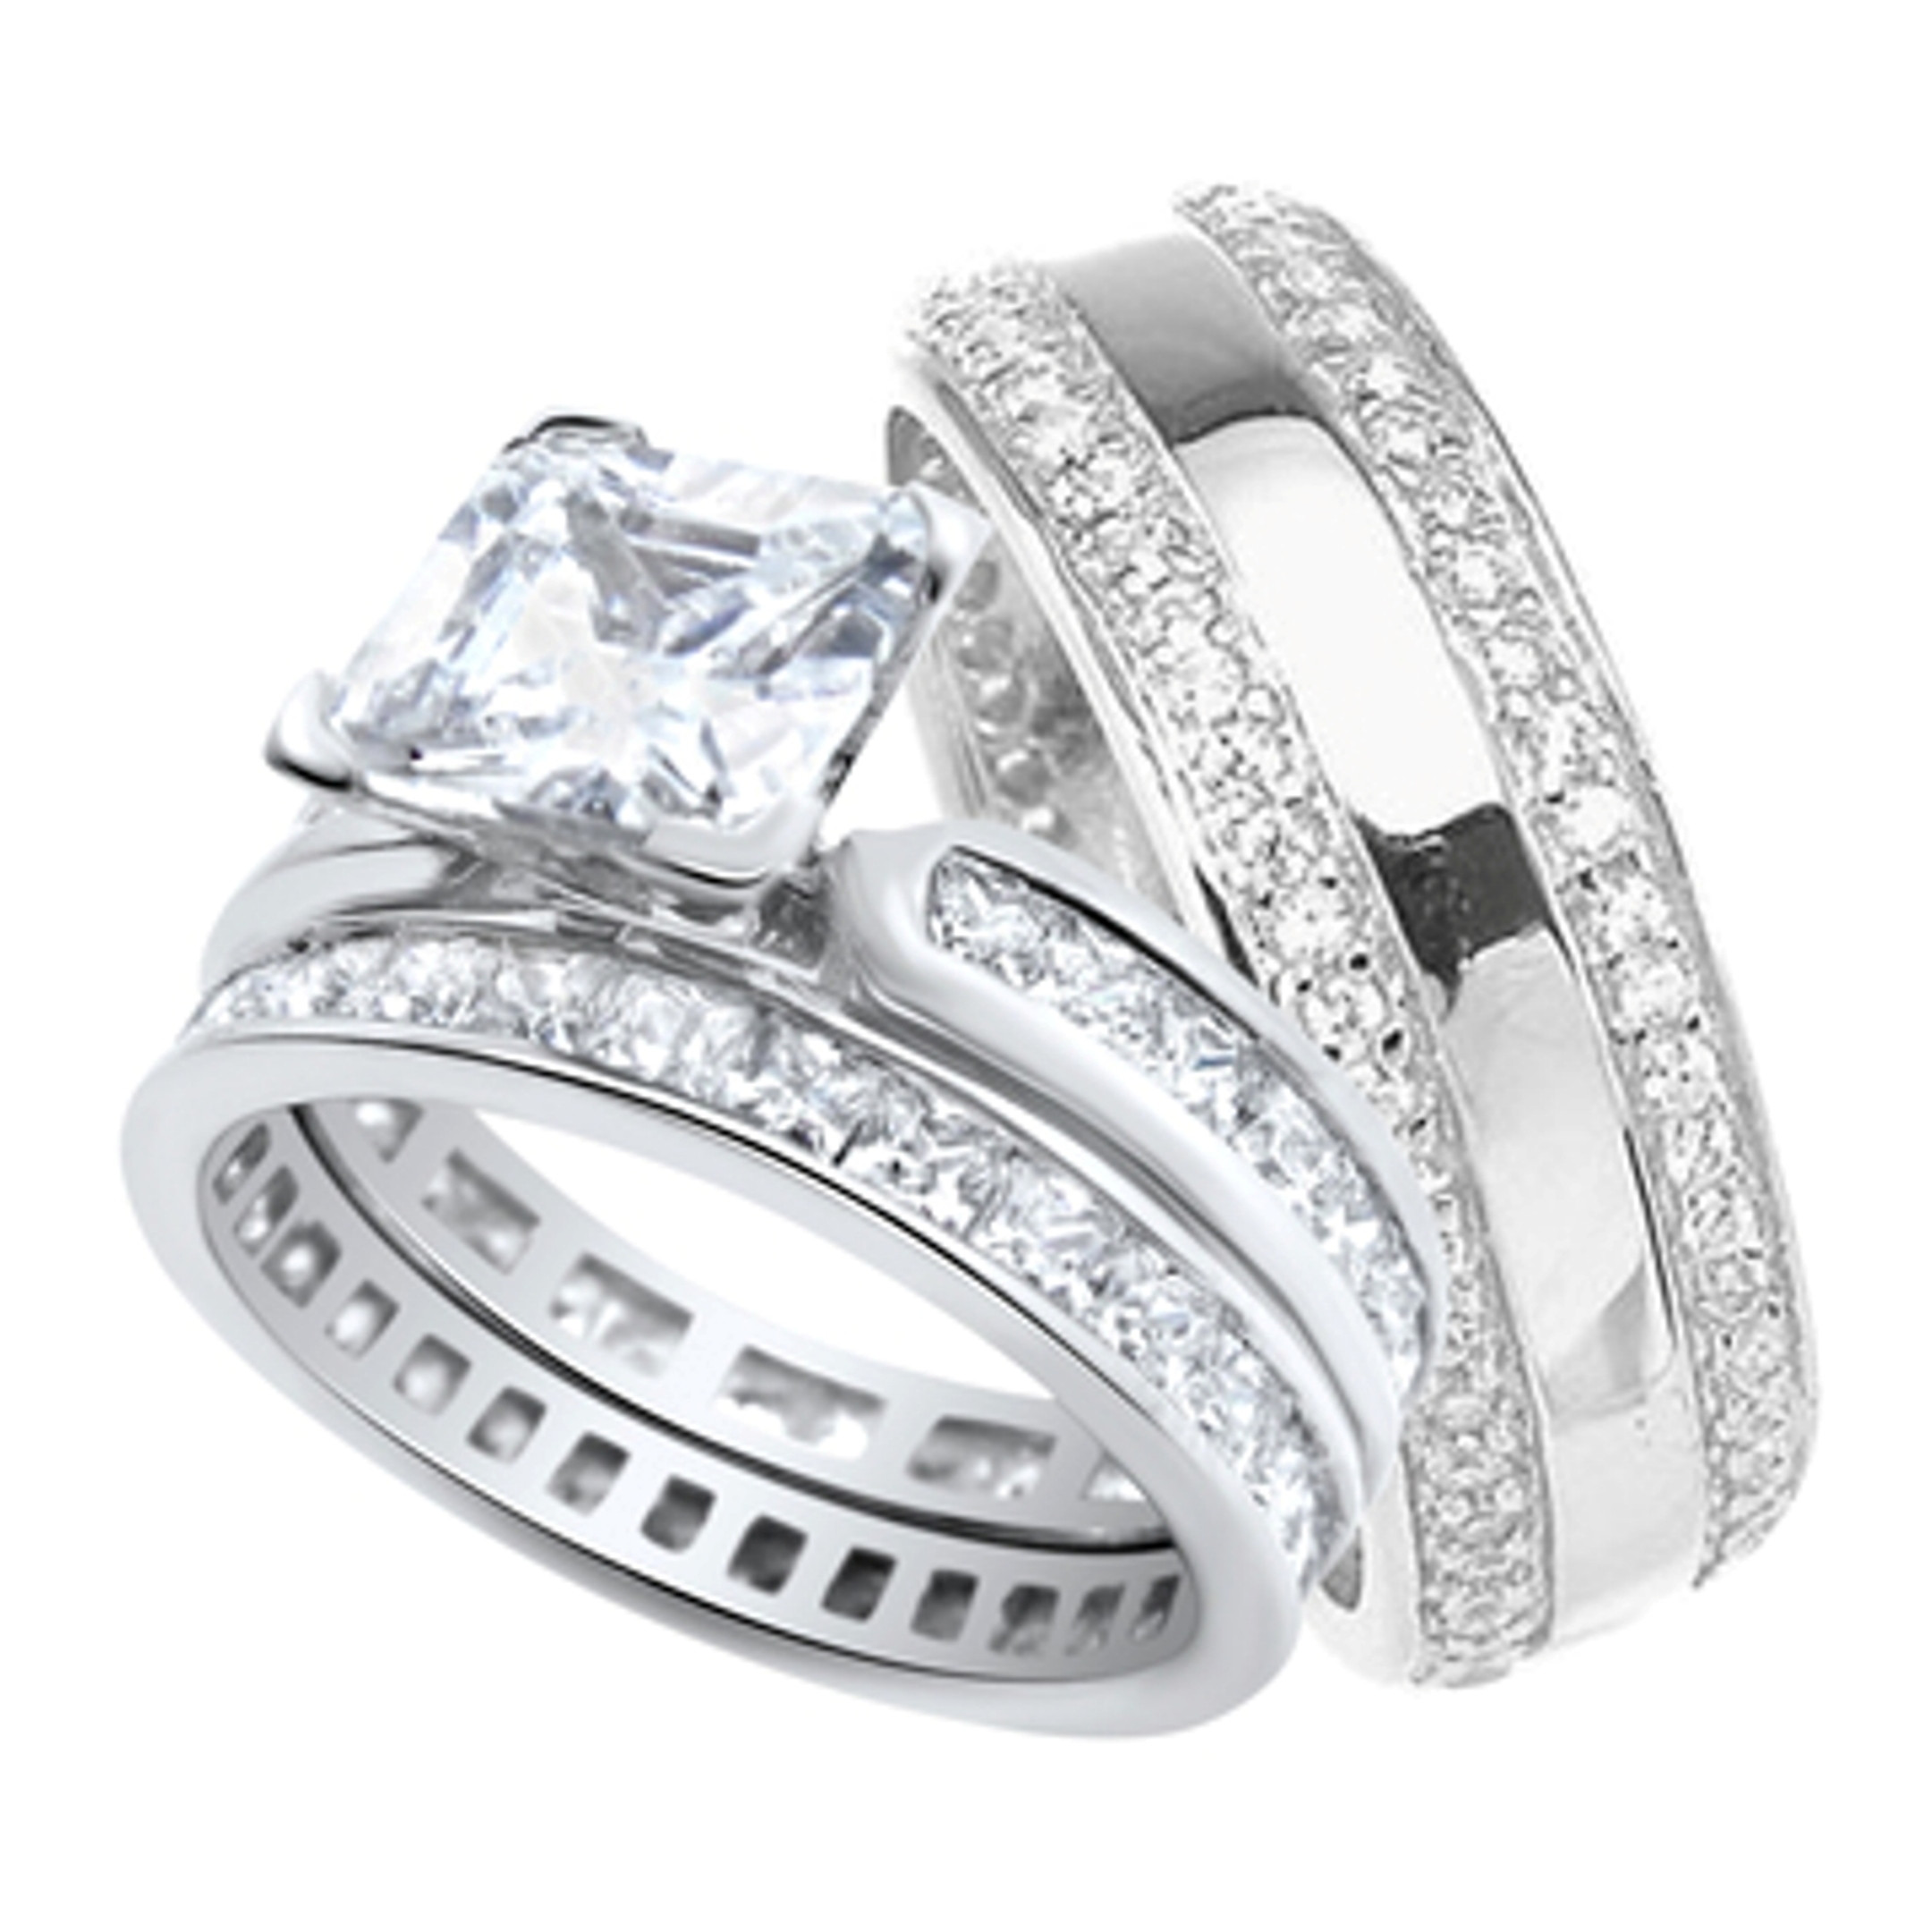 Silver Wedding Rings For Him
 His and Hers Wedding Ring Set Matching Sterling Silver